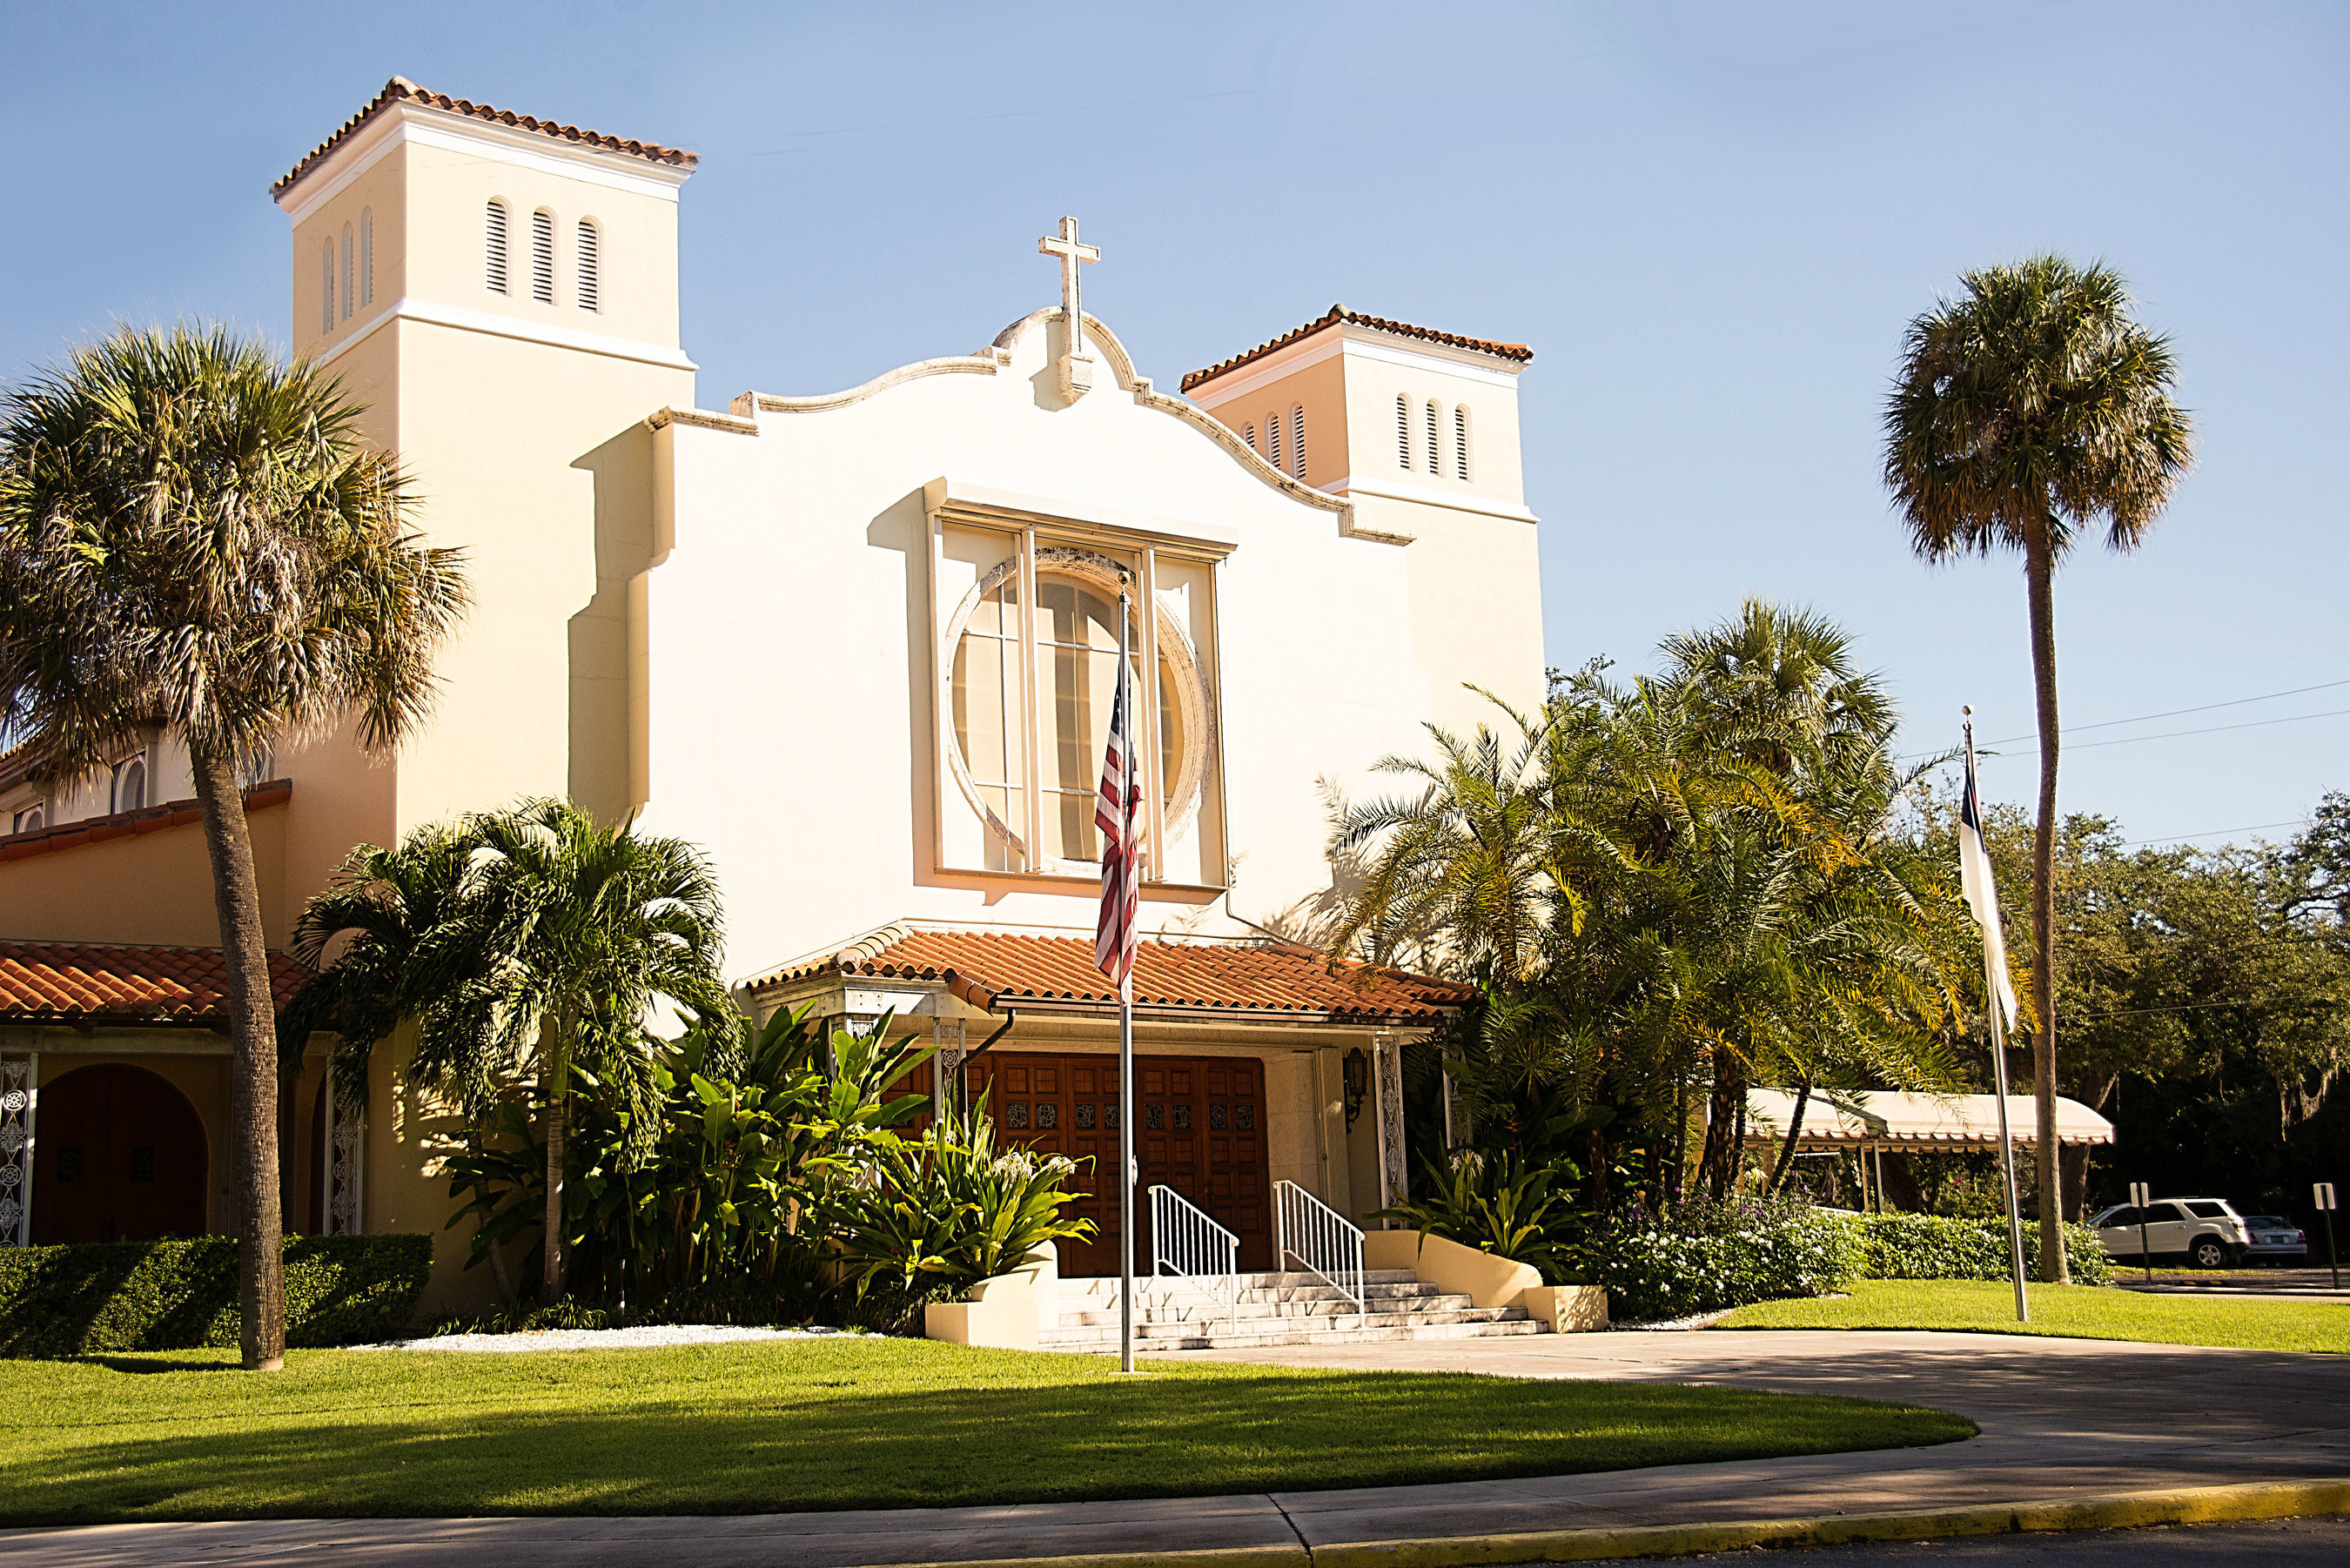 First Presbyterian Church of Fort Lauderdale kicks off the fall season by hosting its annual Rally Day celebration on Sunday, August 28, 2016 at 10:30 a.m.